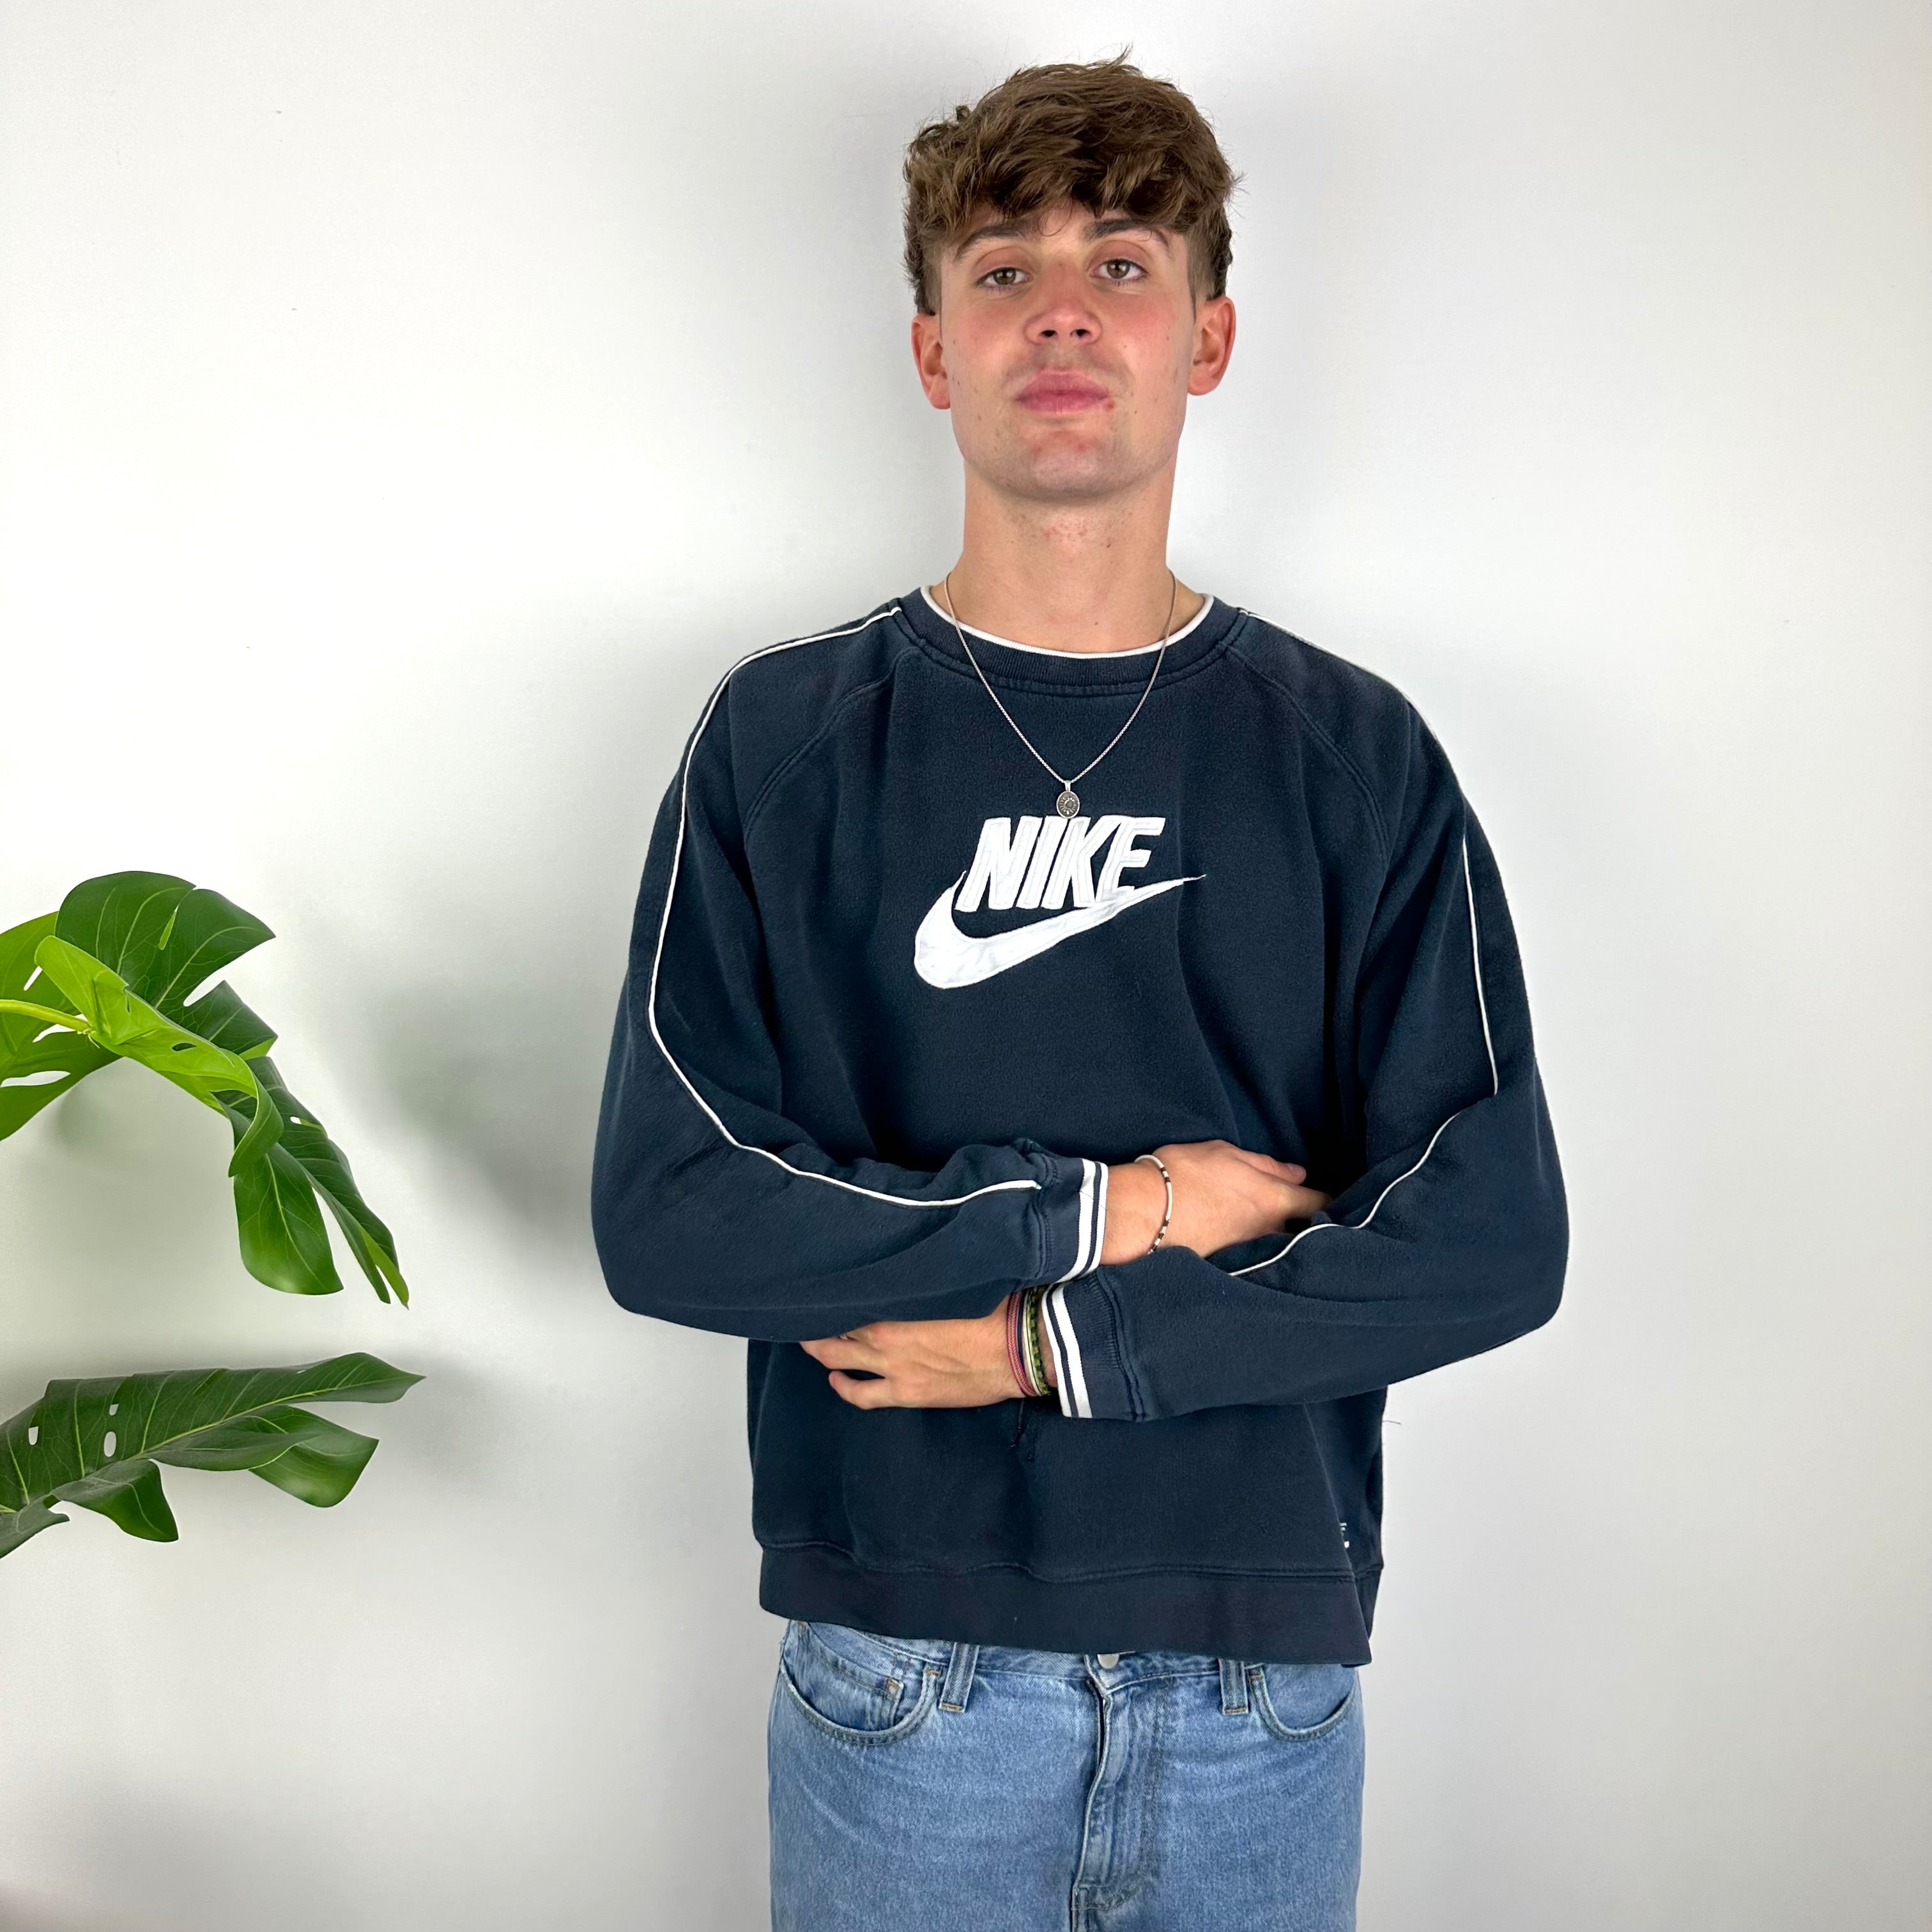 Nike RARE Navy Embroidered Spell Out Sweatshirt (L)